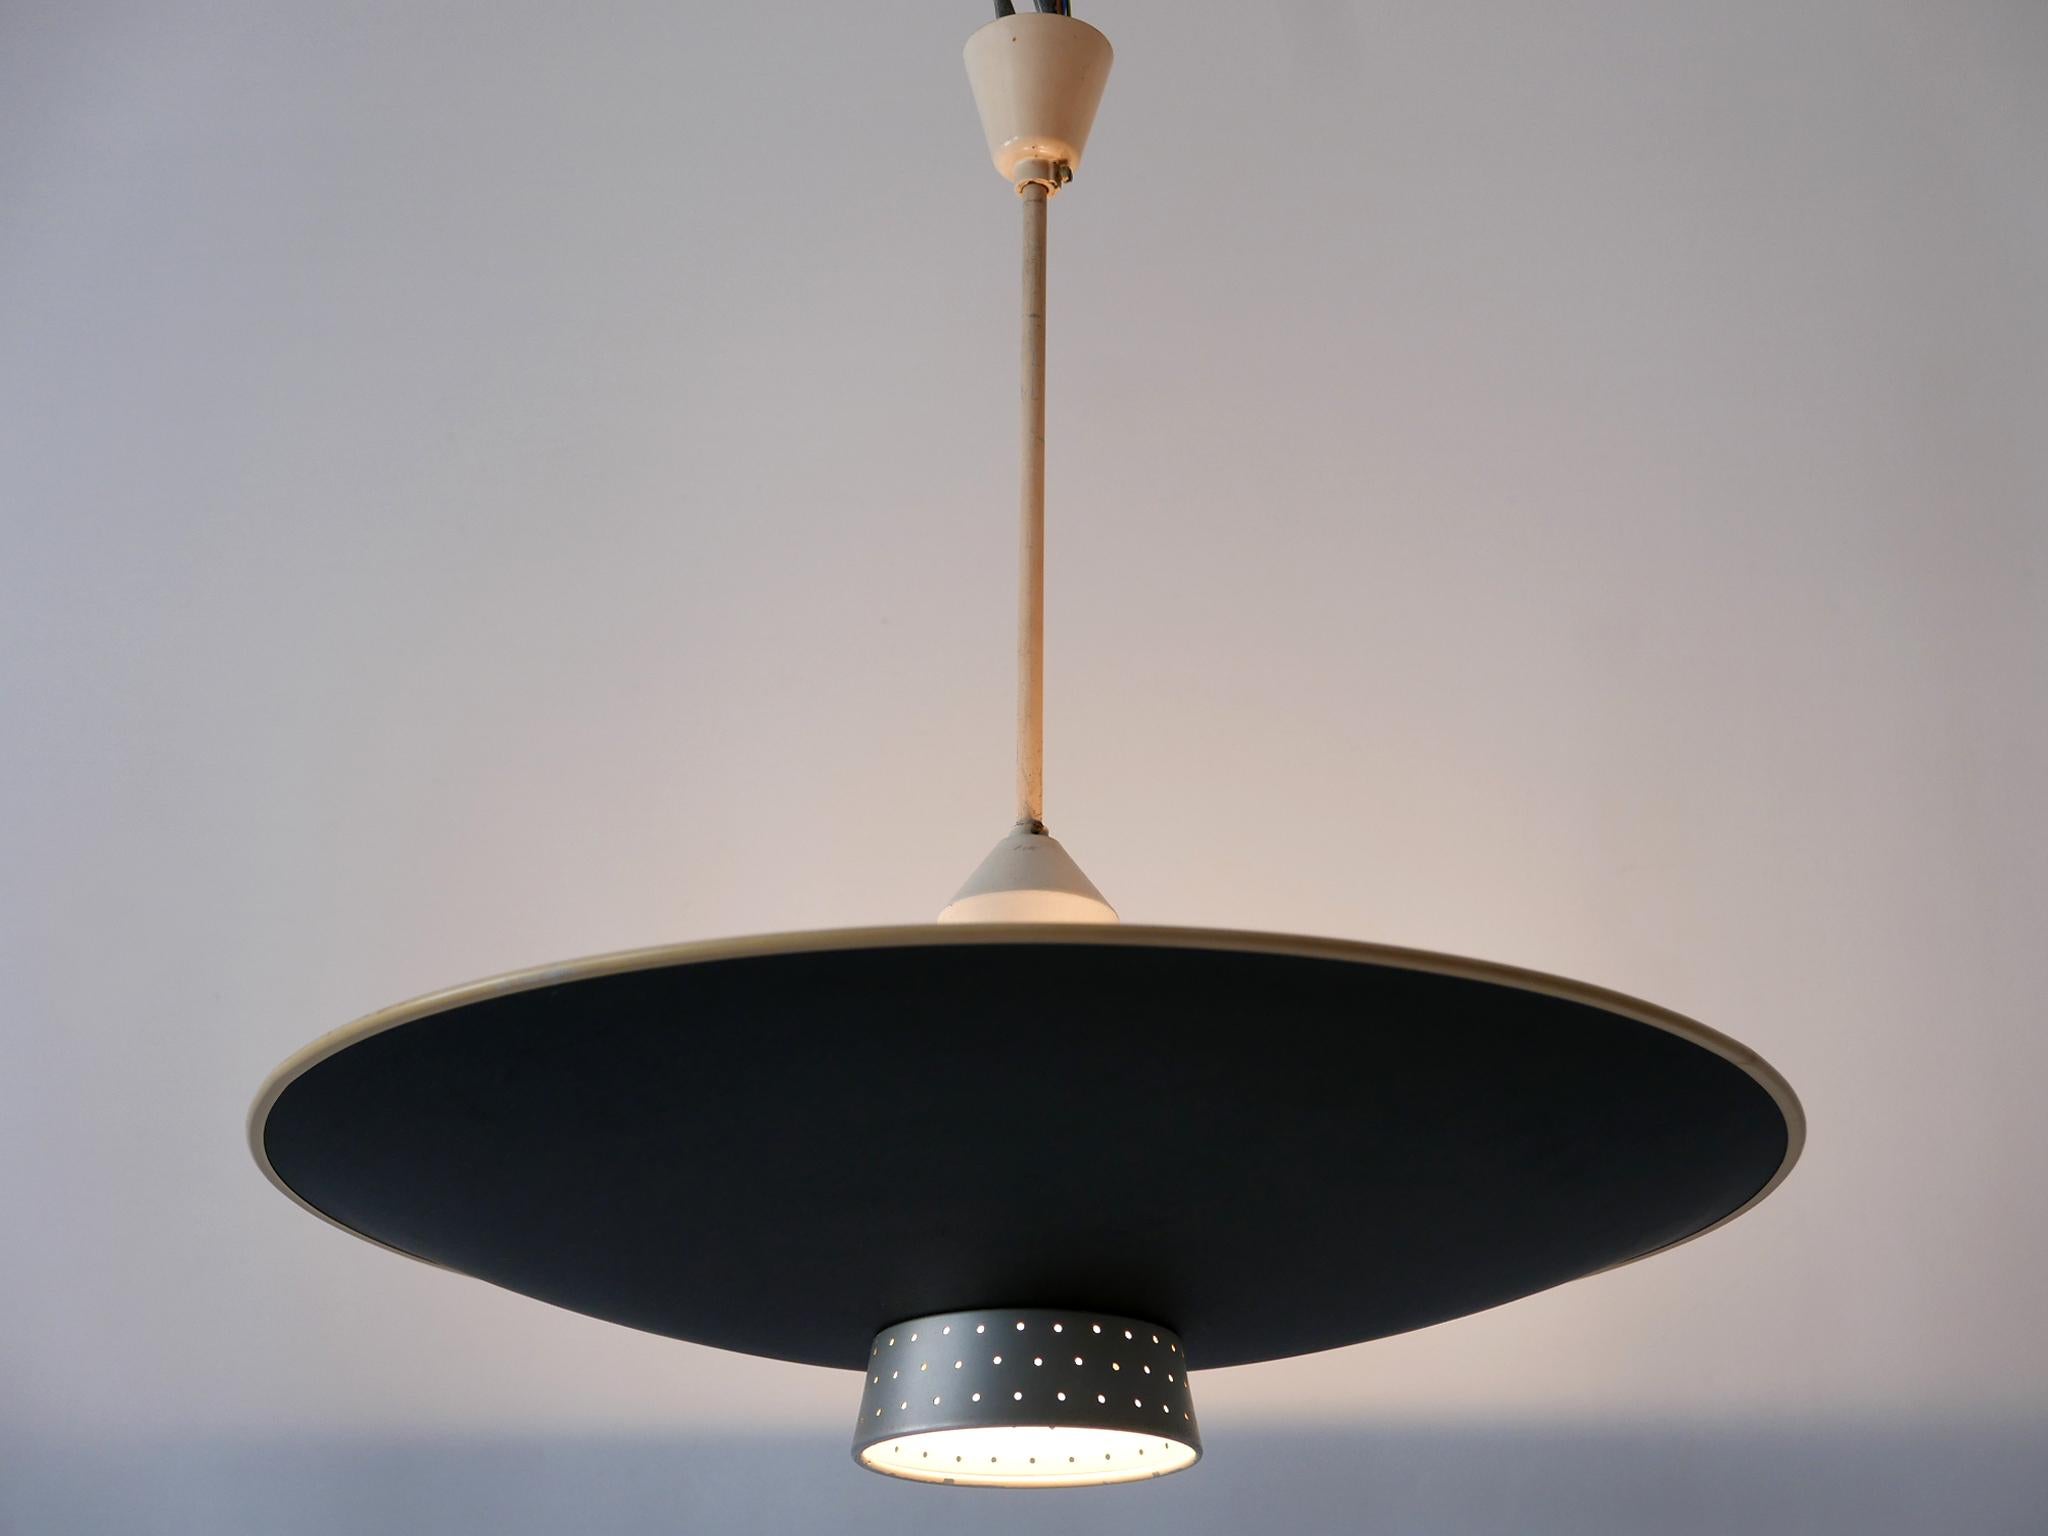 Extremely rare, lovely and highly decorative Mid-Century Modern four-flamed pendant lamp or ceiling light. Designed and manufactured by Philips, Netherlands, 1950s.

Executed in aluminium, the chandelier comes with 4 x E27 / E26 Edison screw fit